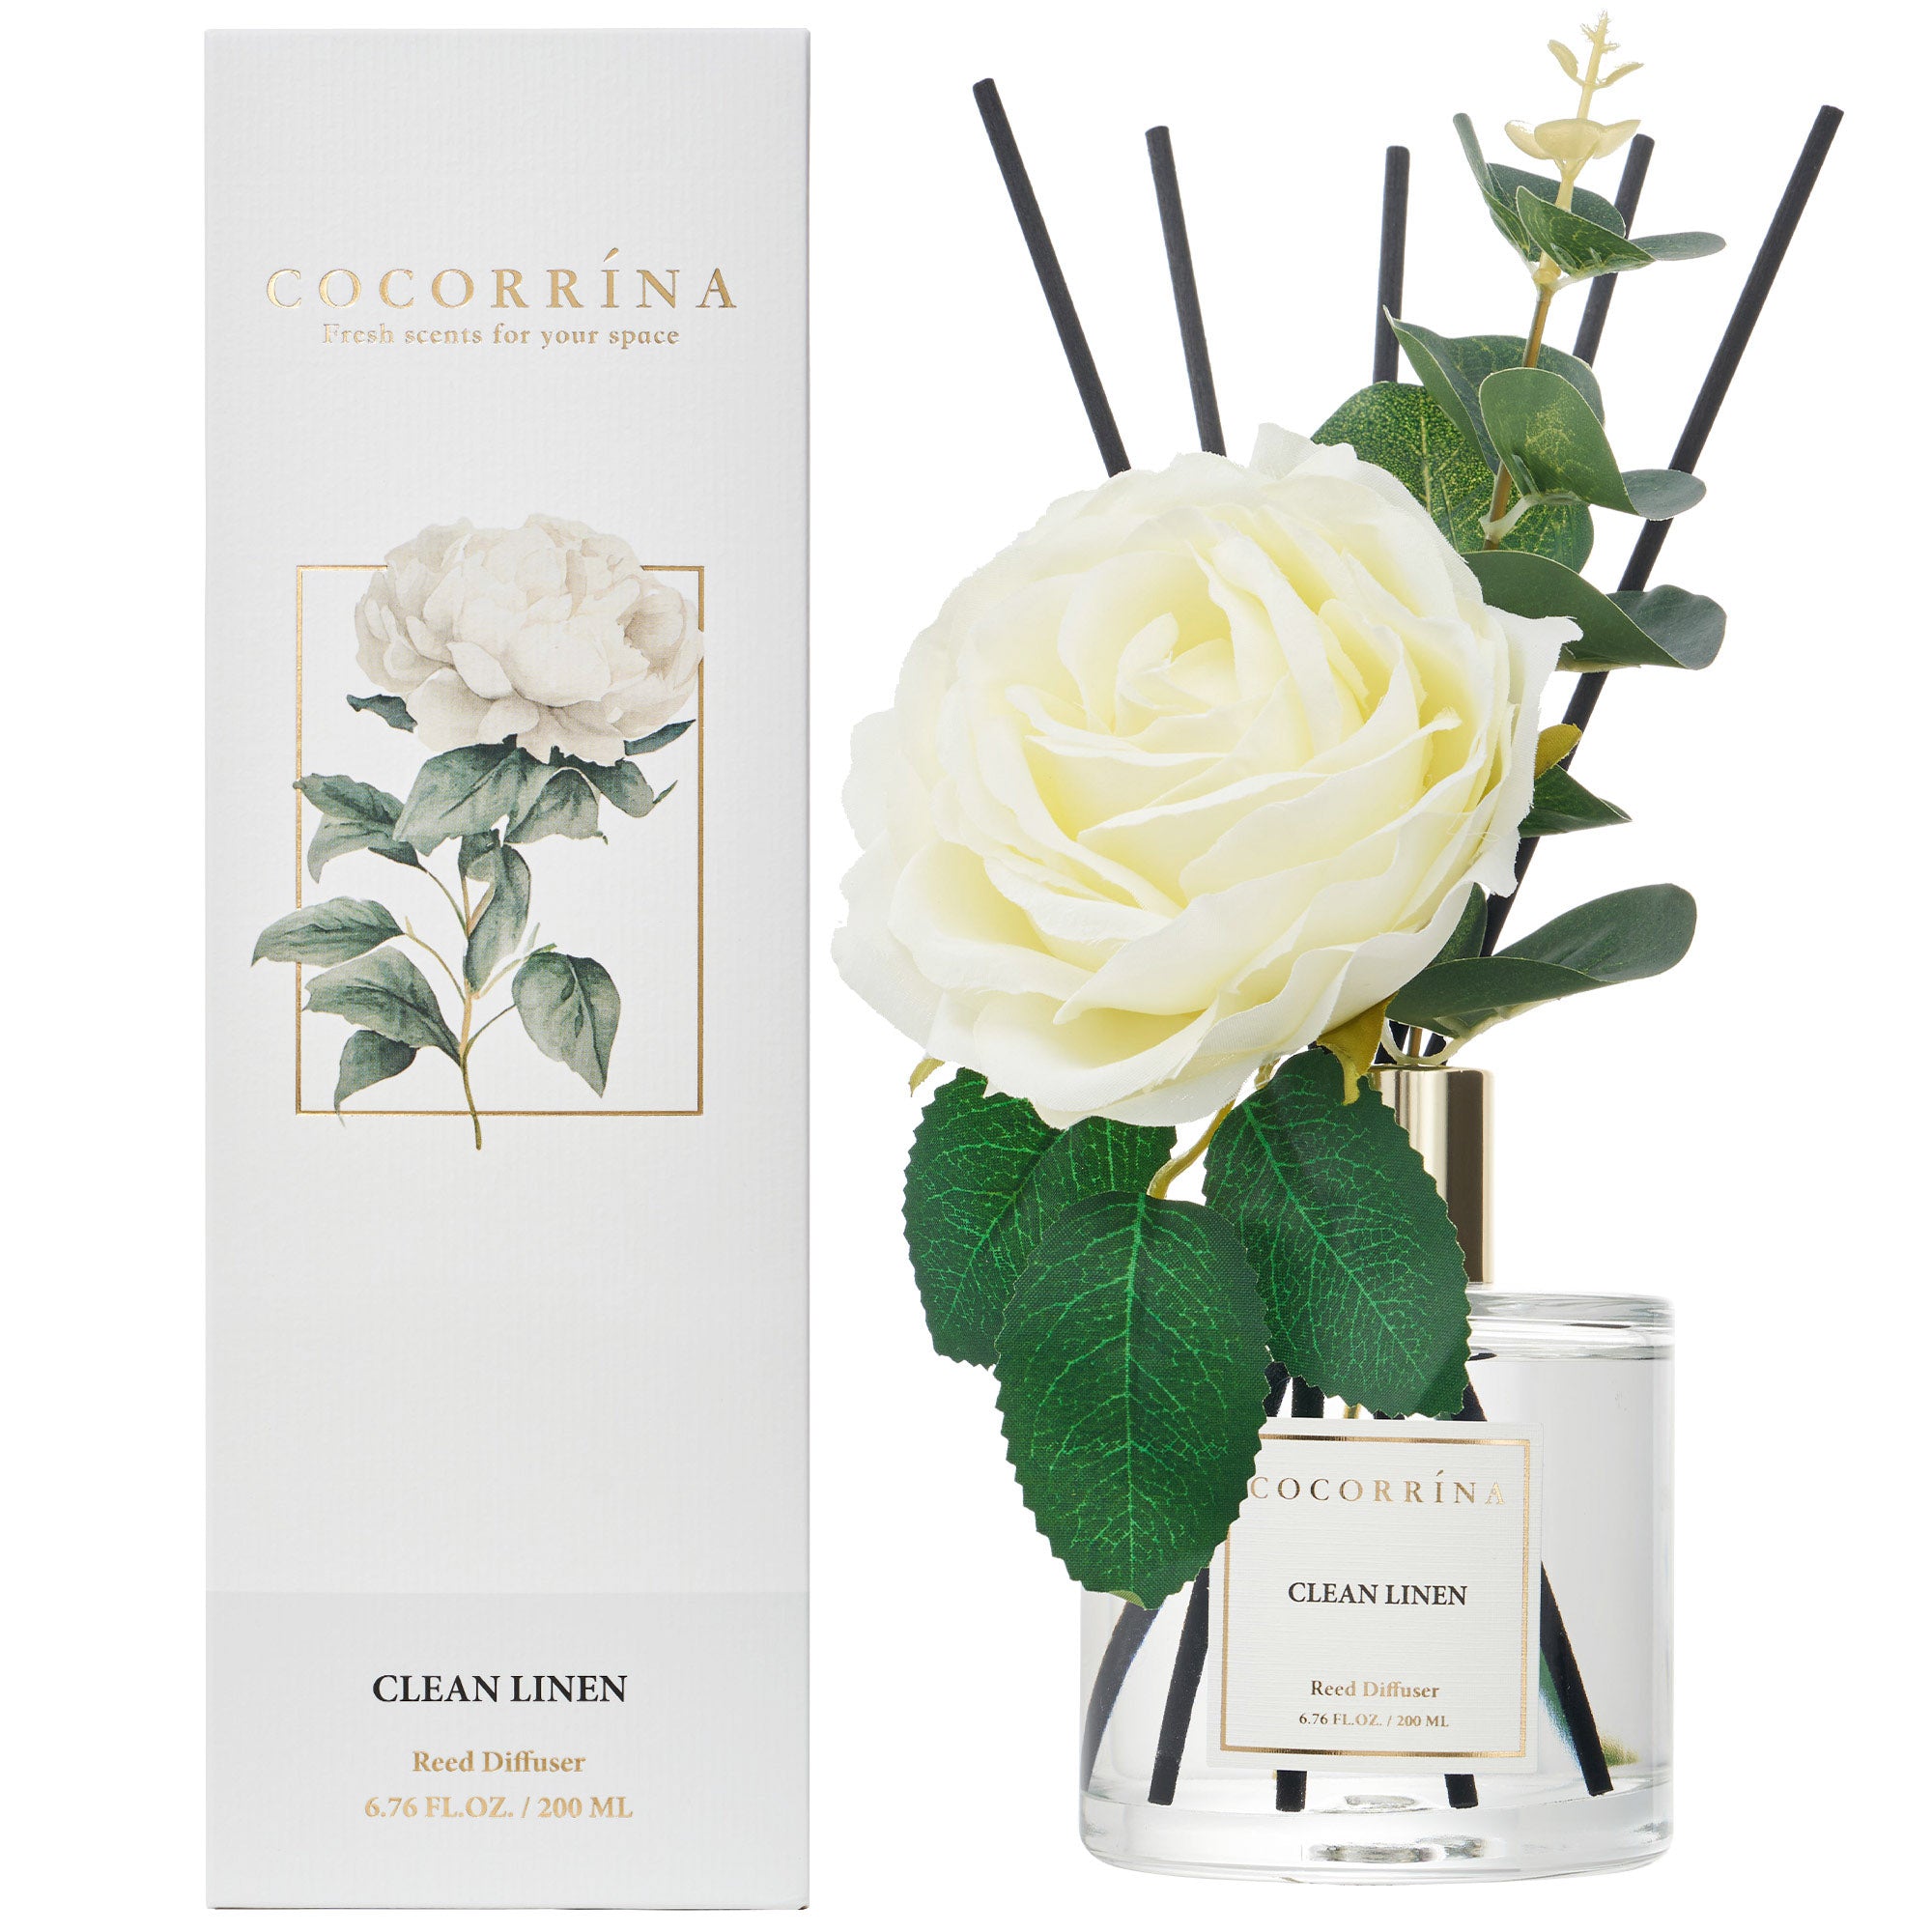 COCORRÍNA Clean Linen Flower Reed Diffuser